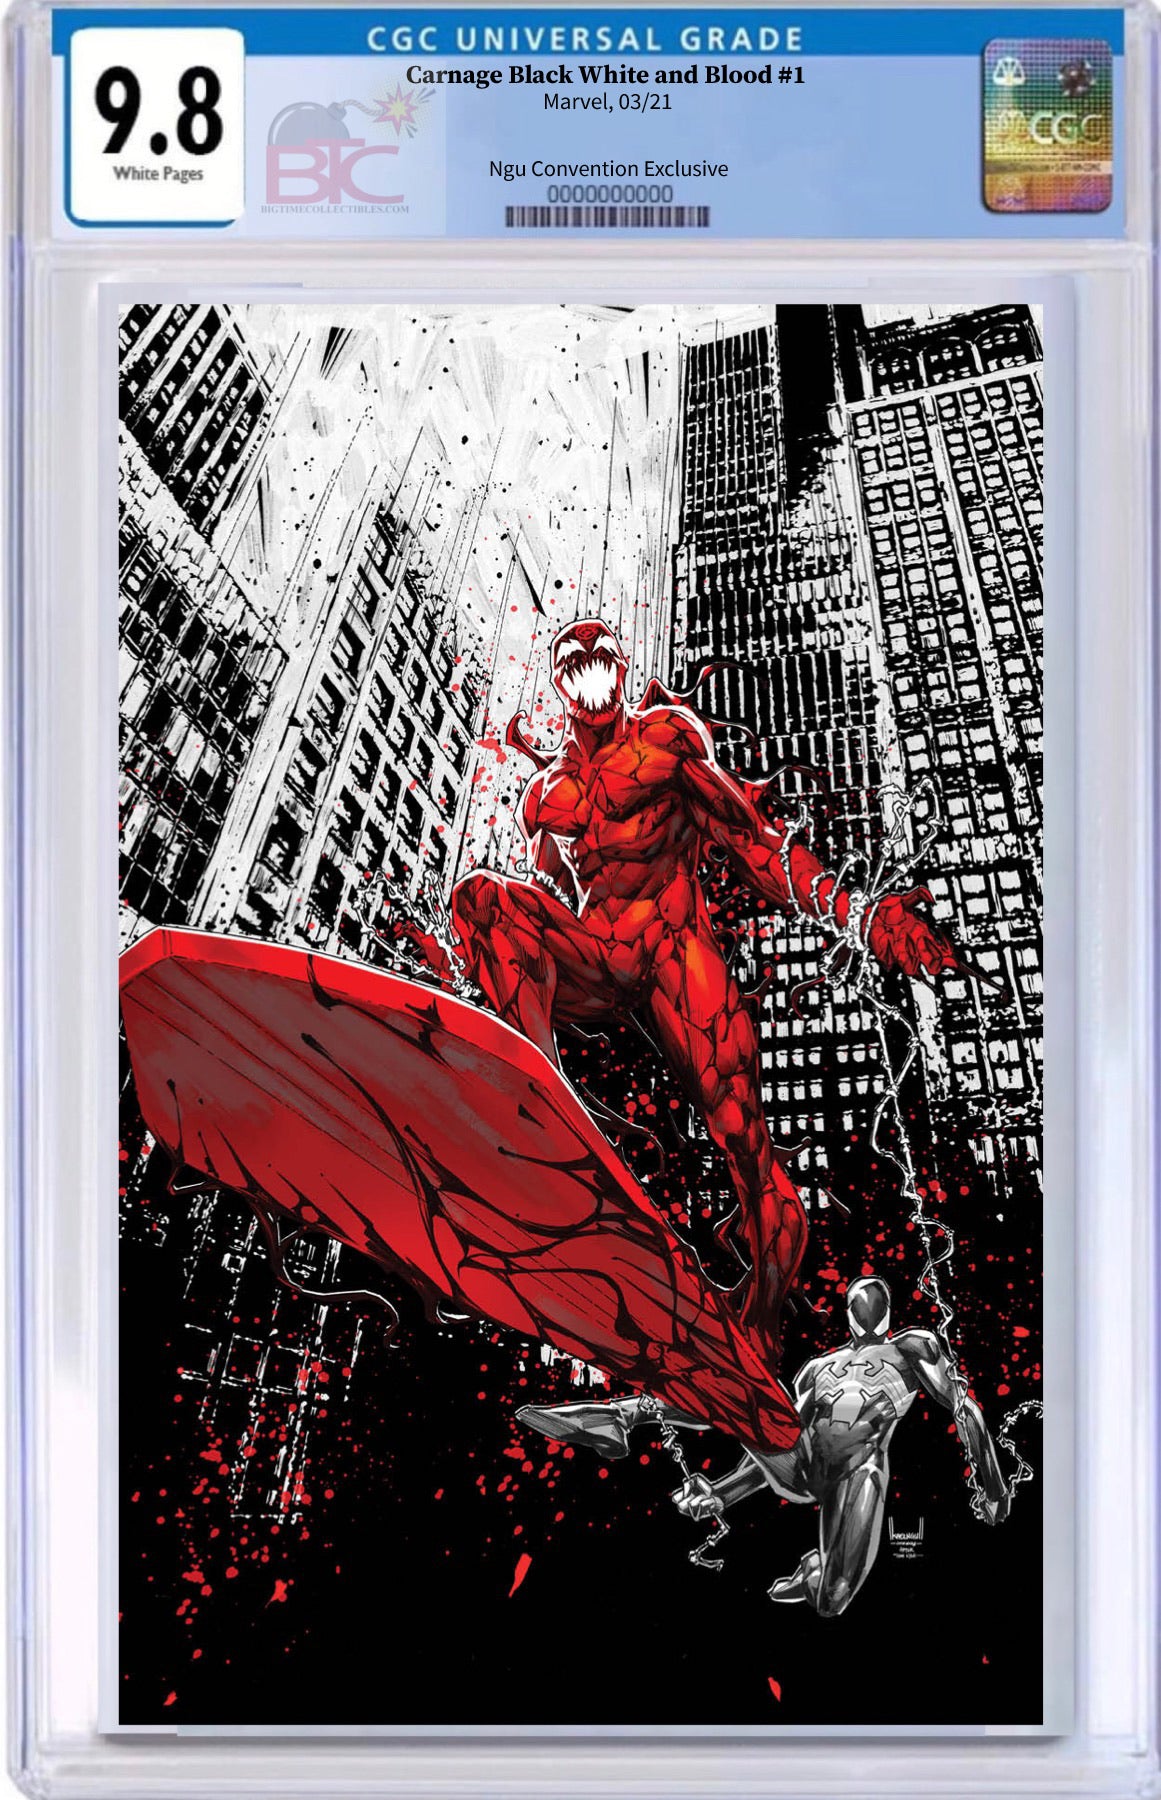 CARNAGE BLACK WHITE AND BLOOD #1 KAEL NGU ONLINE CONVENTION EXCLUSIVE LIMITED TO 500